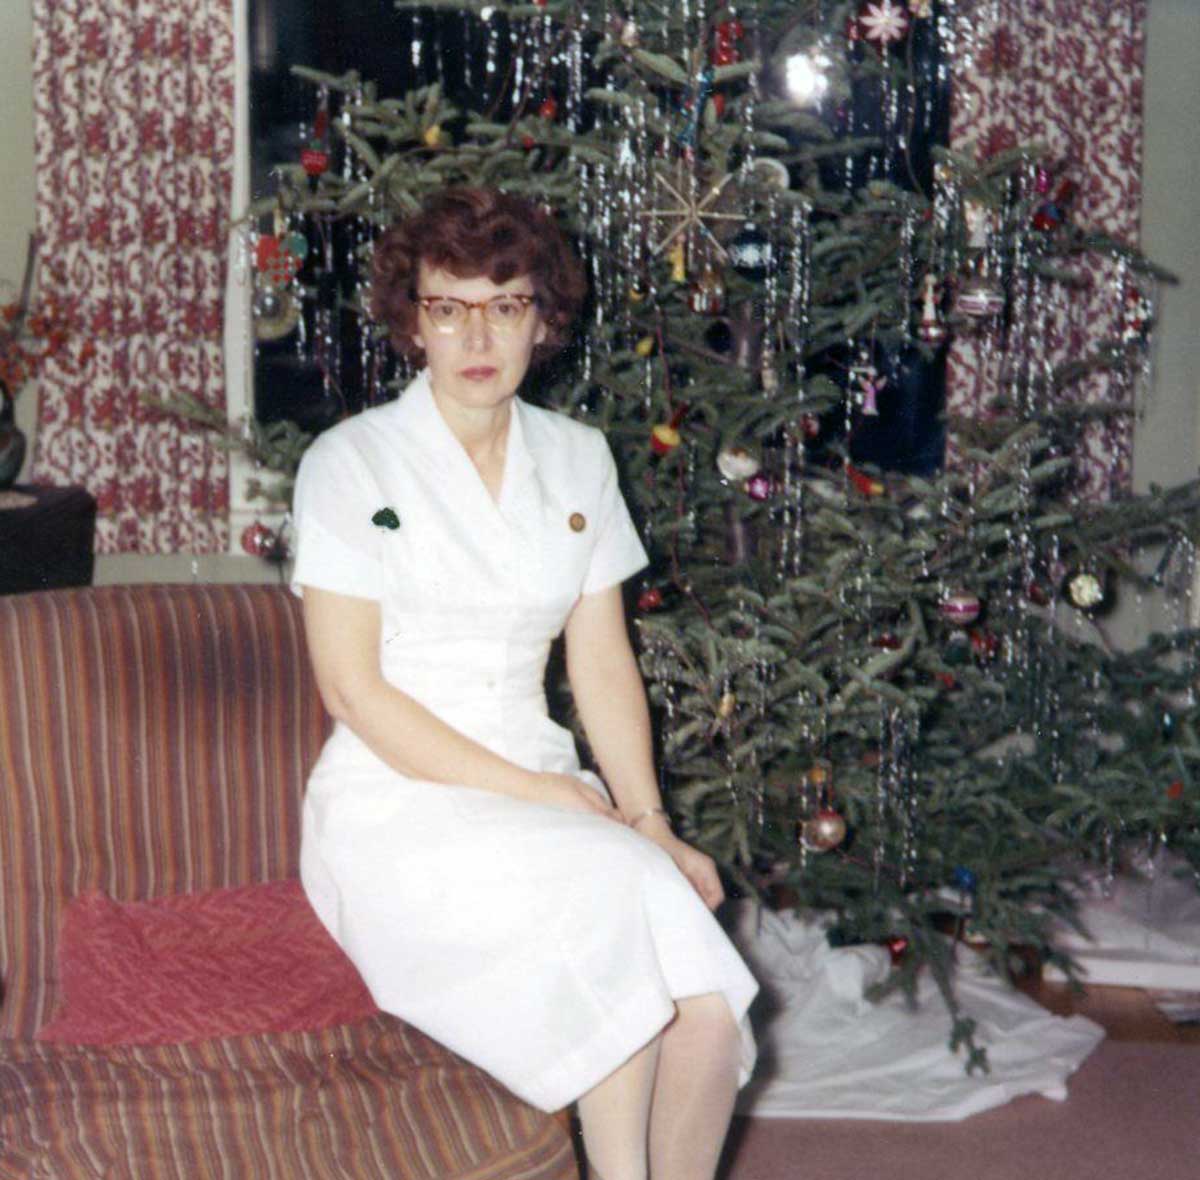 Photos of 20th Century Women at Christmas - 1960s